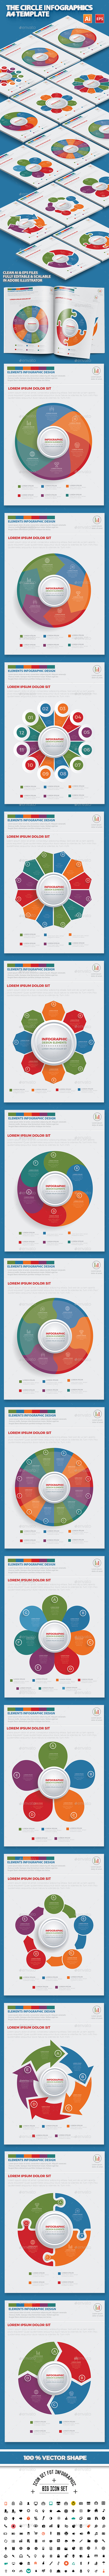 The Circle Infographic Design in Infographic Templates